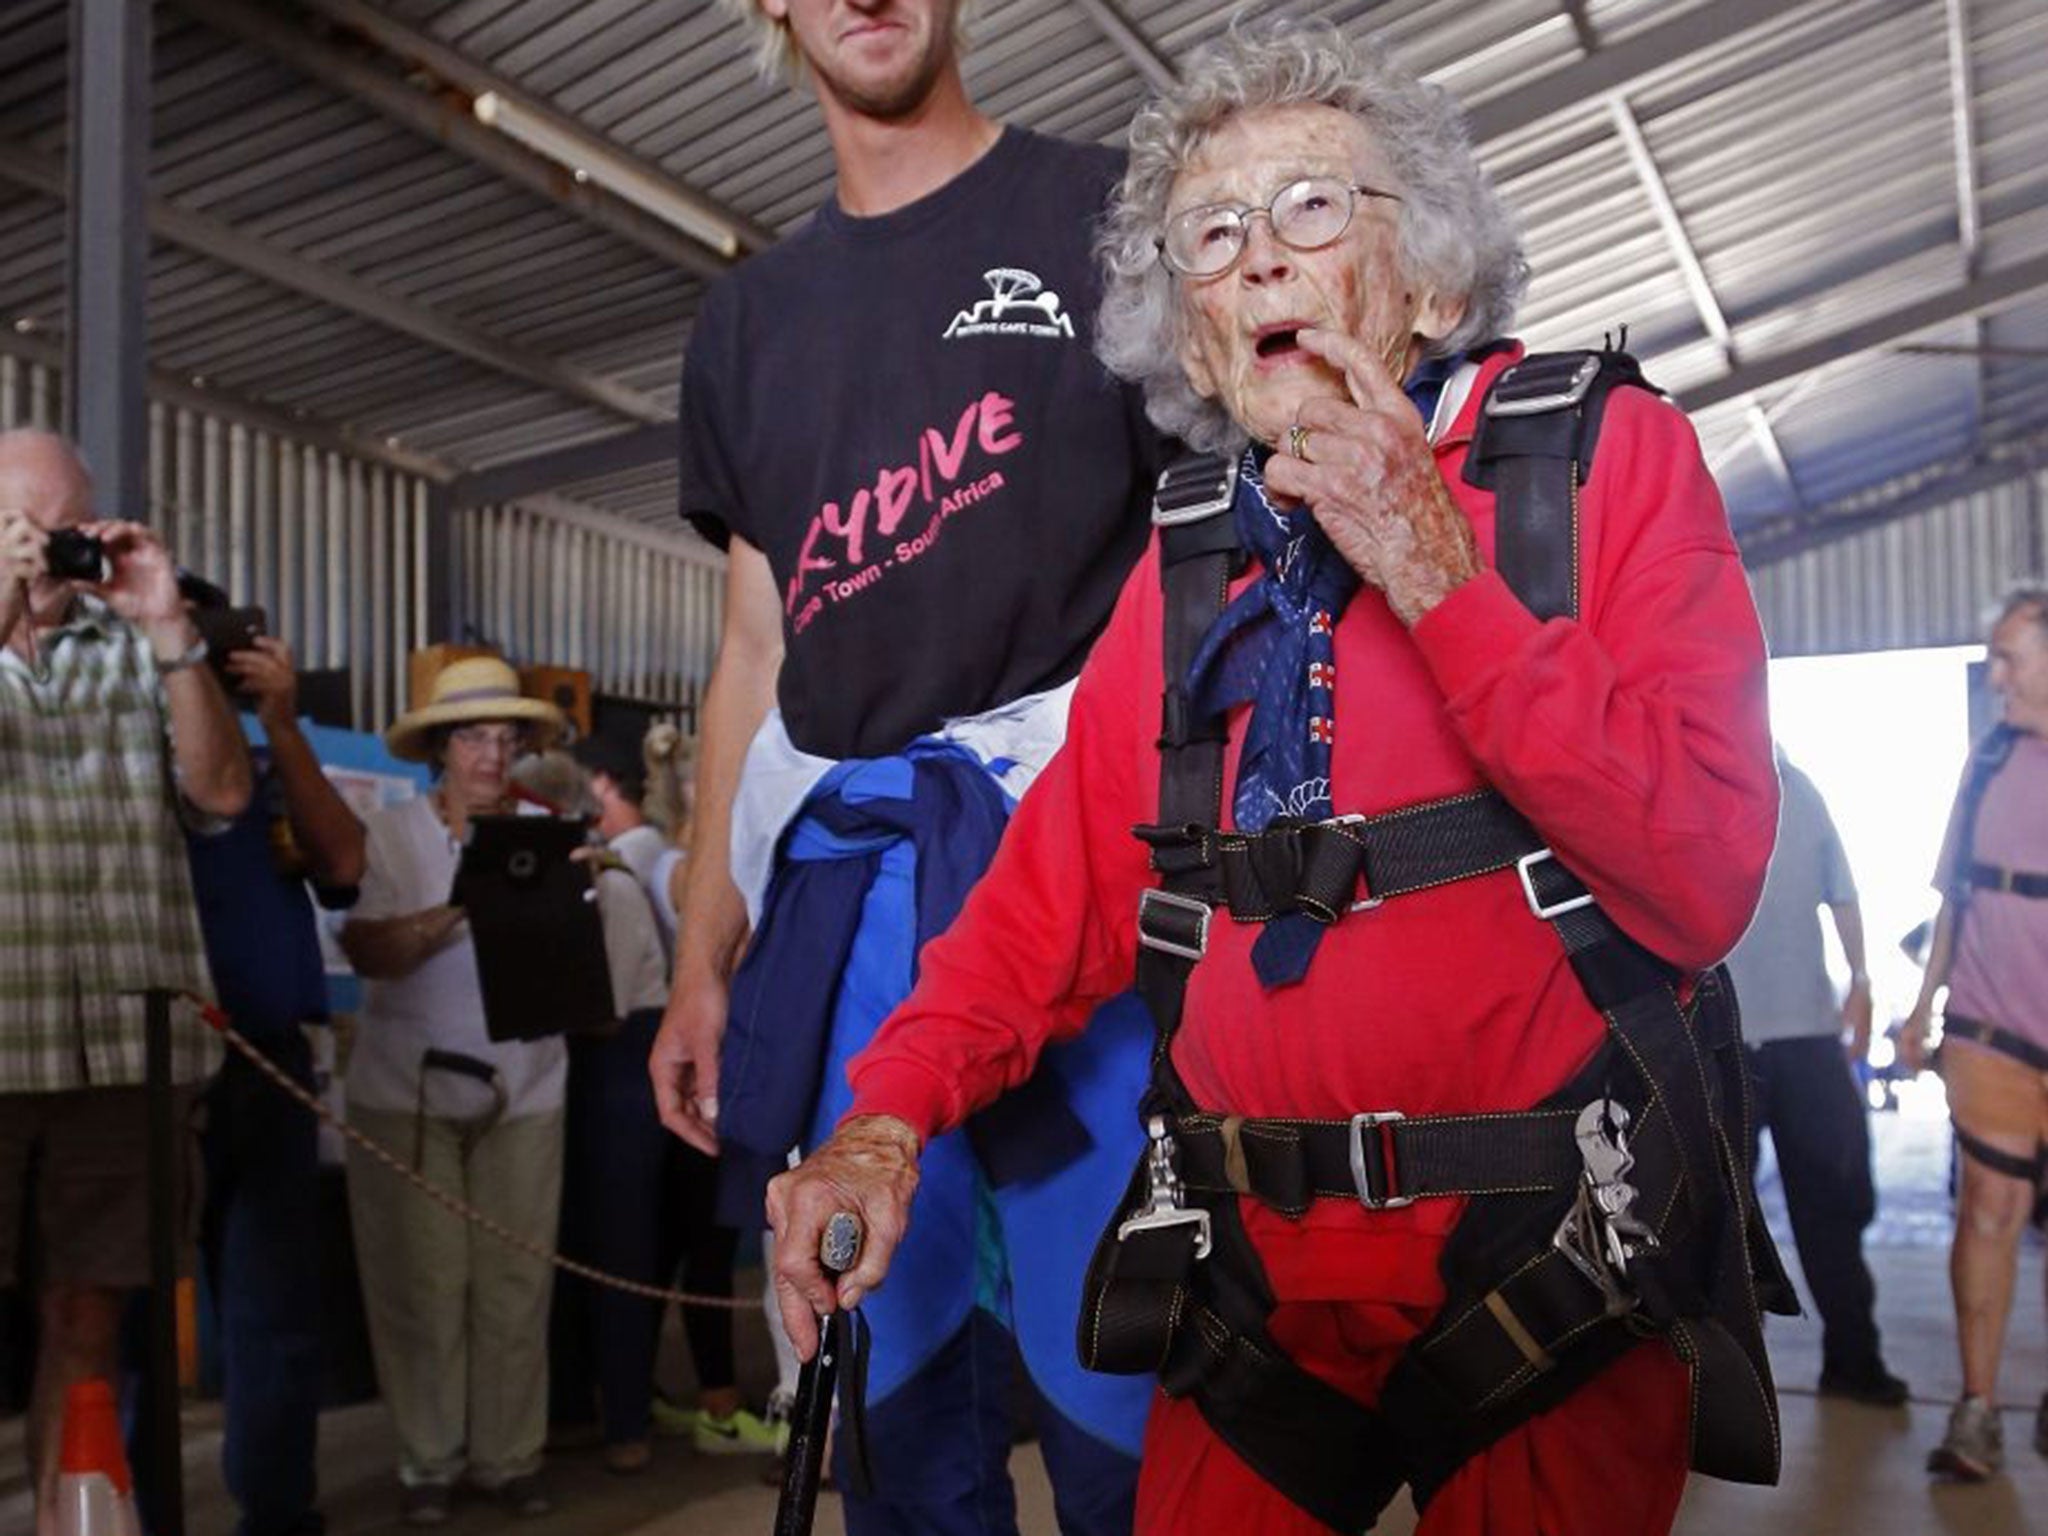 Centenarian Georgina Harwood, foreground, prepares with Jason Baker, for her tandem parachute jump forming part of her birthday celebrations